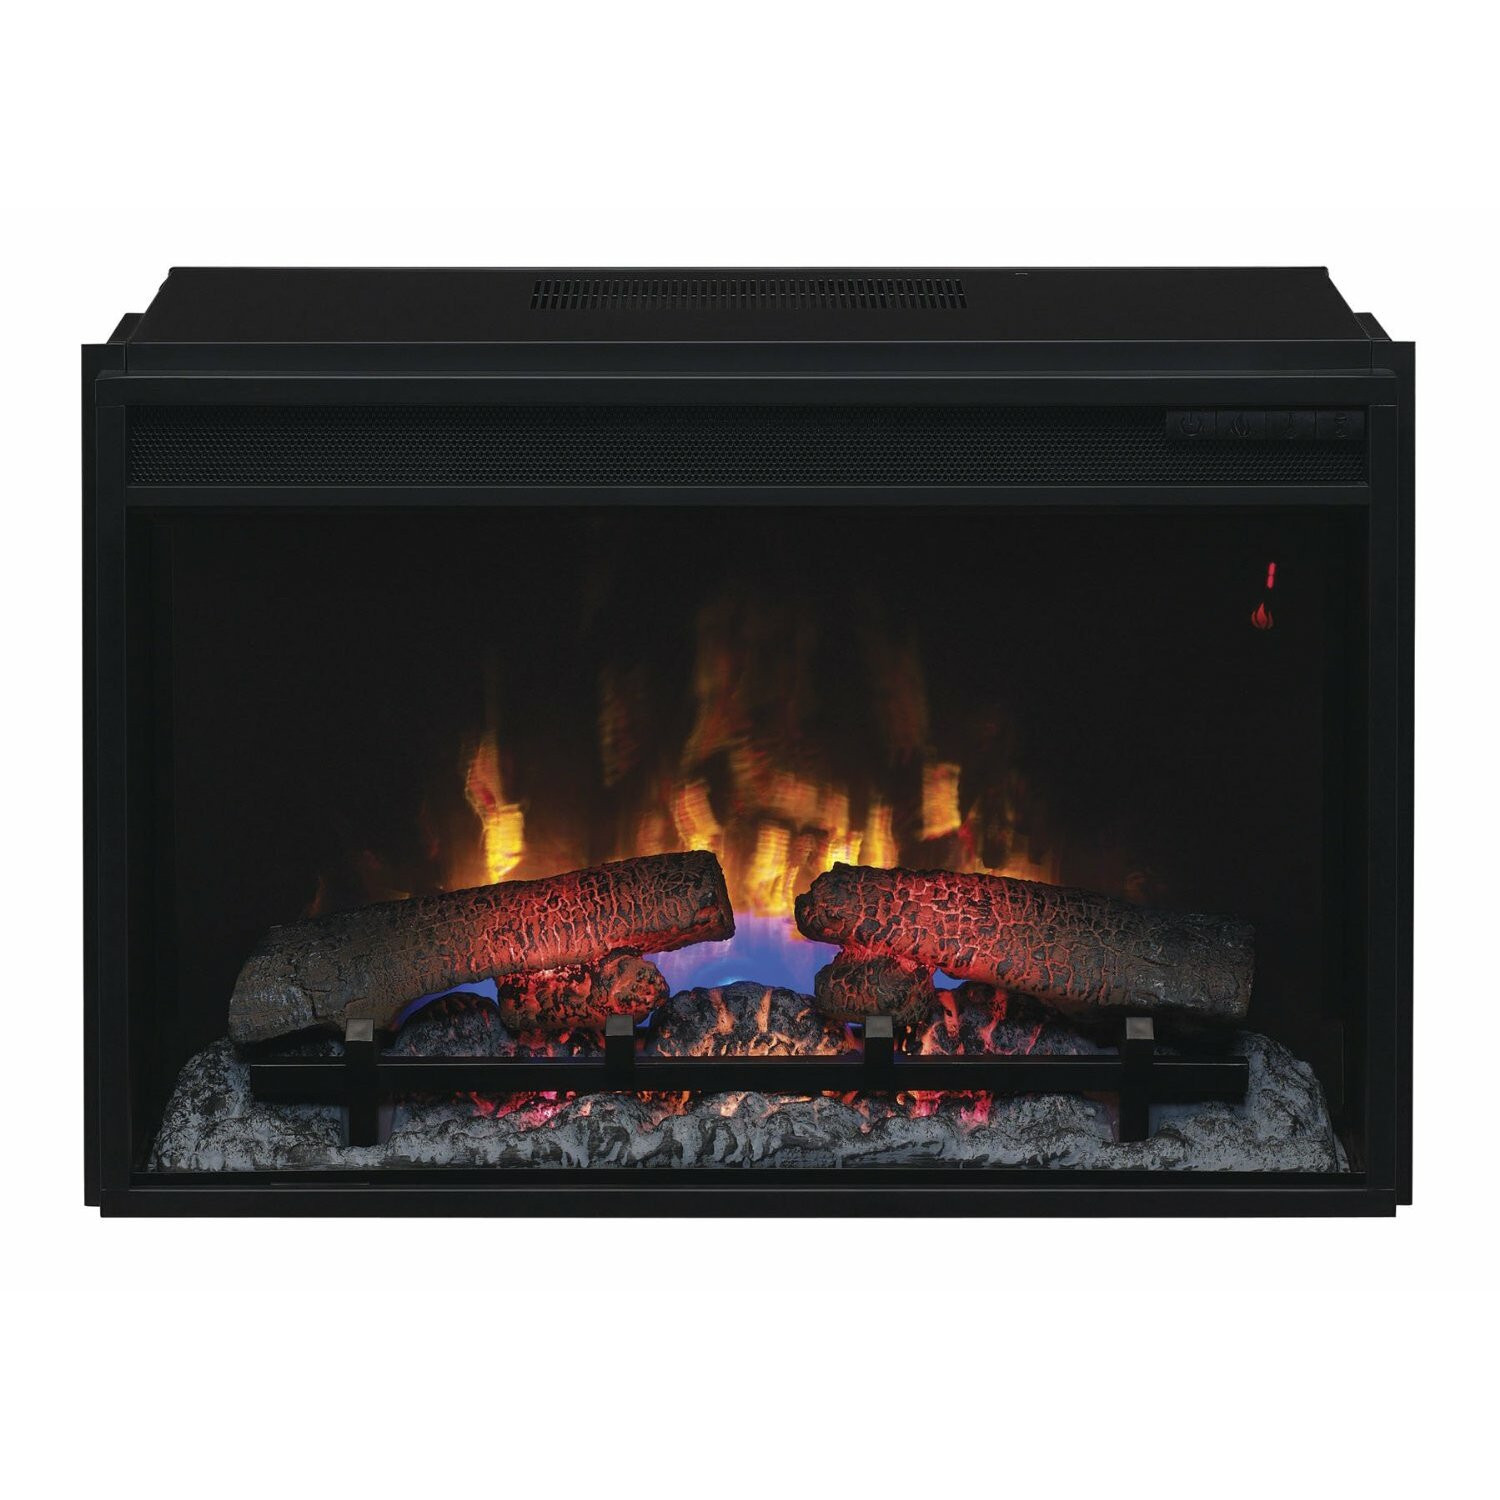 Classicflame Electric Fireplace Insert
 Classic Flame 26" Infrared Electric Fireplace Insert